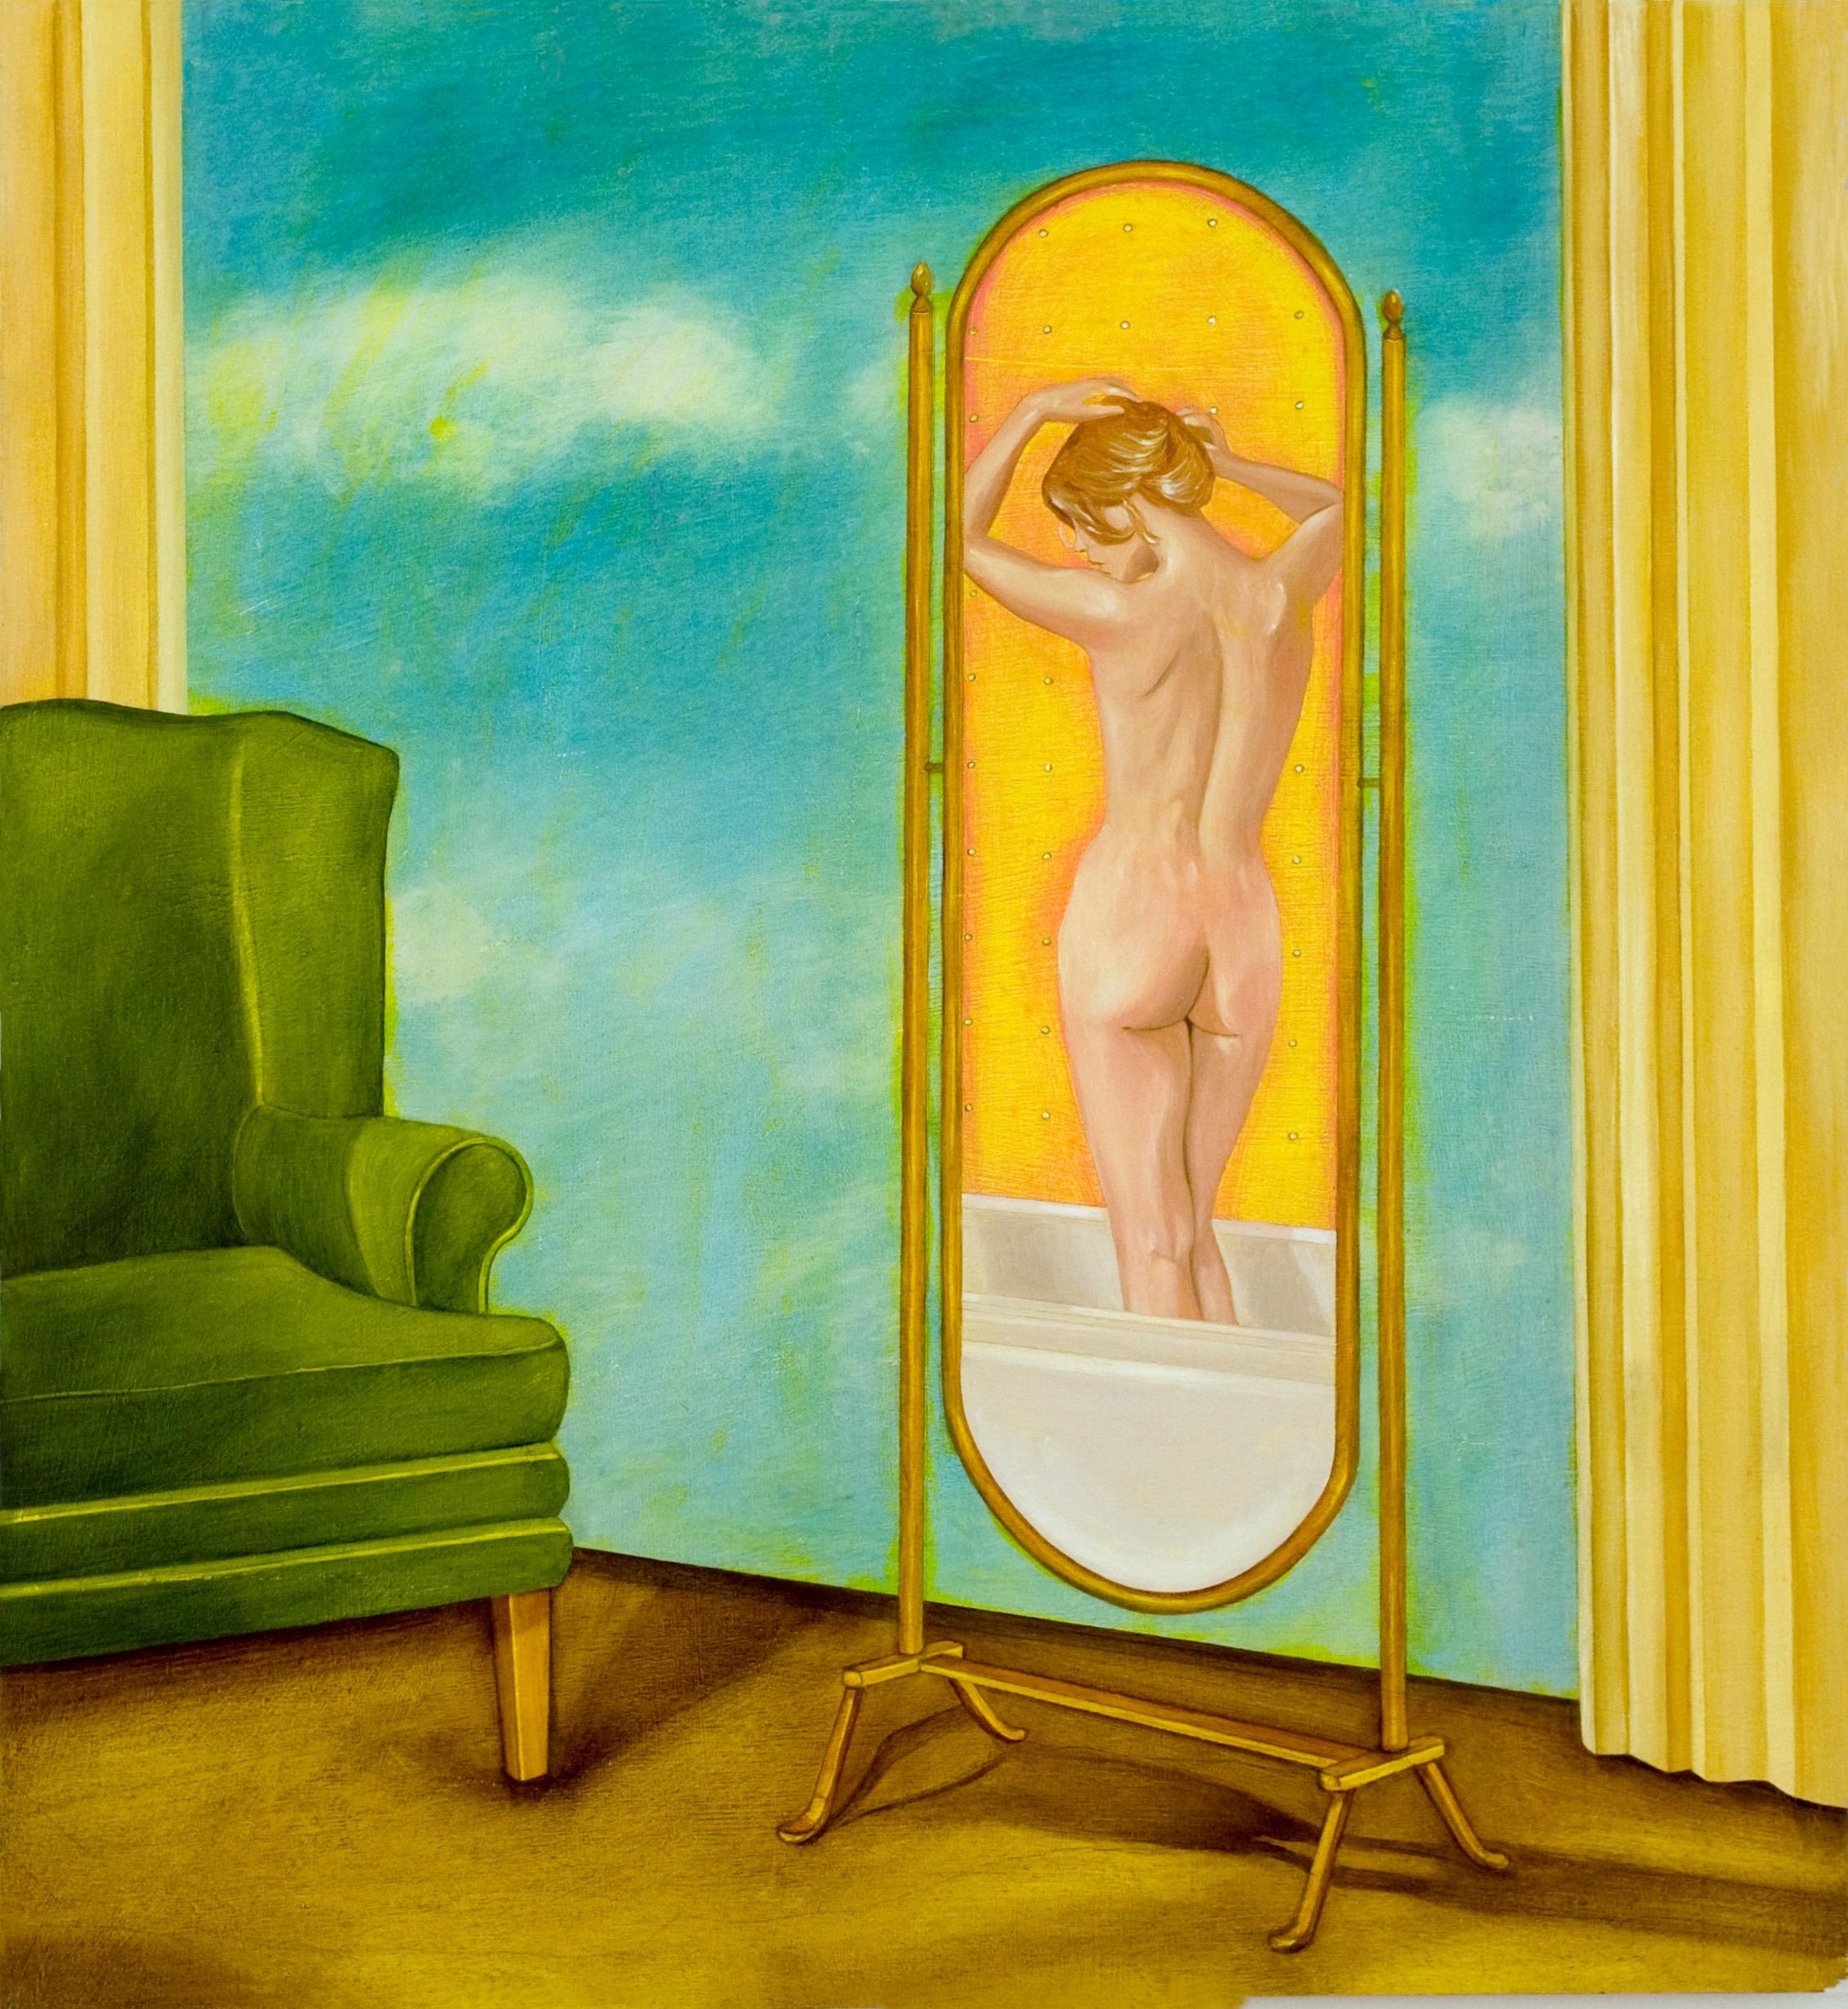 Robin Tewes Nude Painting - I'm A Good Listener, Oil Painting, Canvas, Figurative Art, Nude, Signed